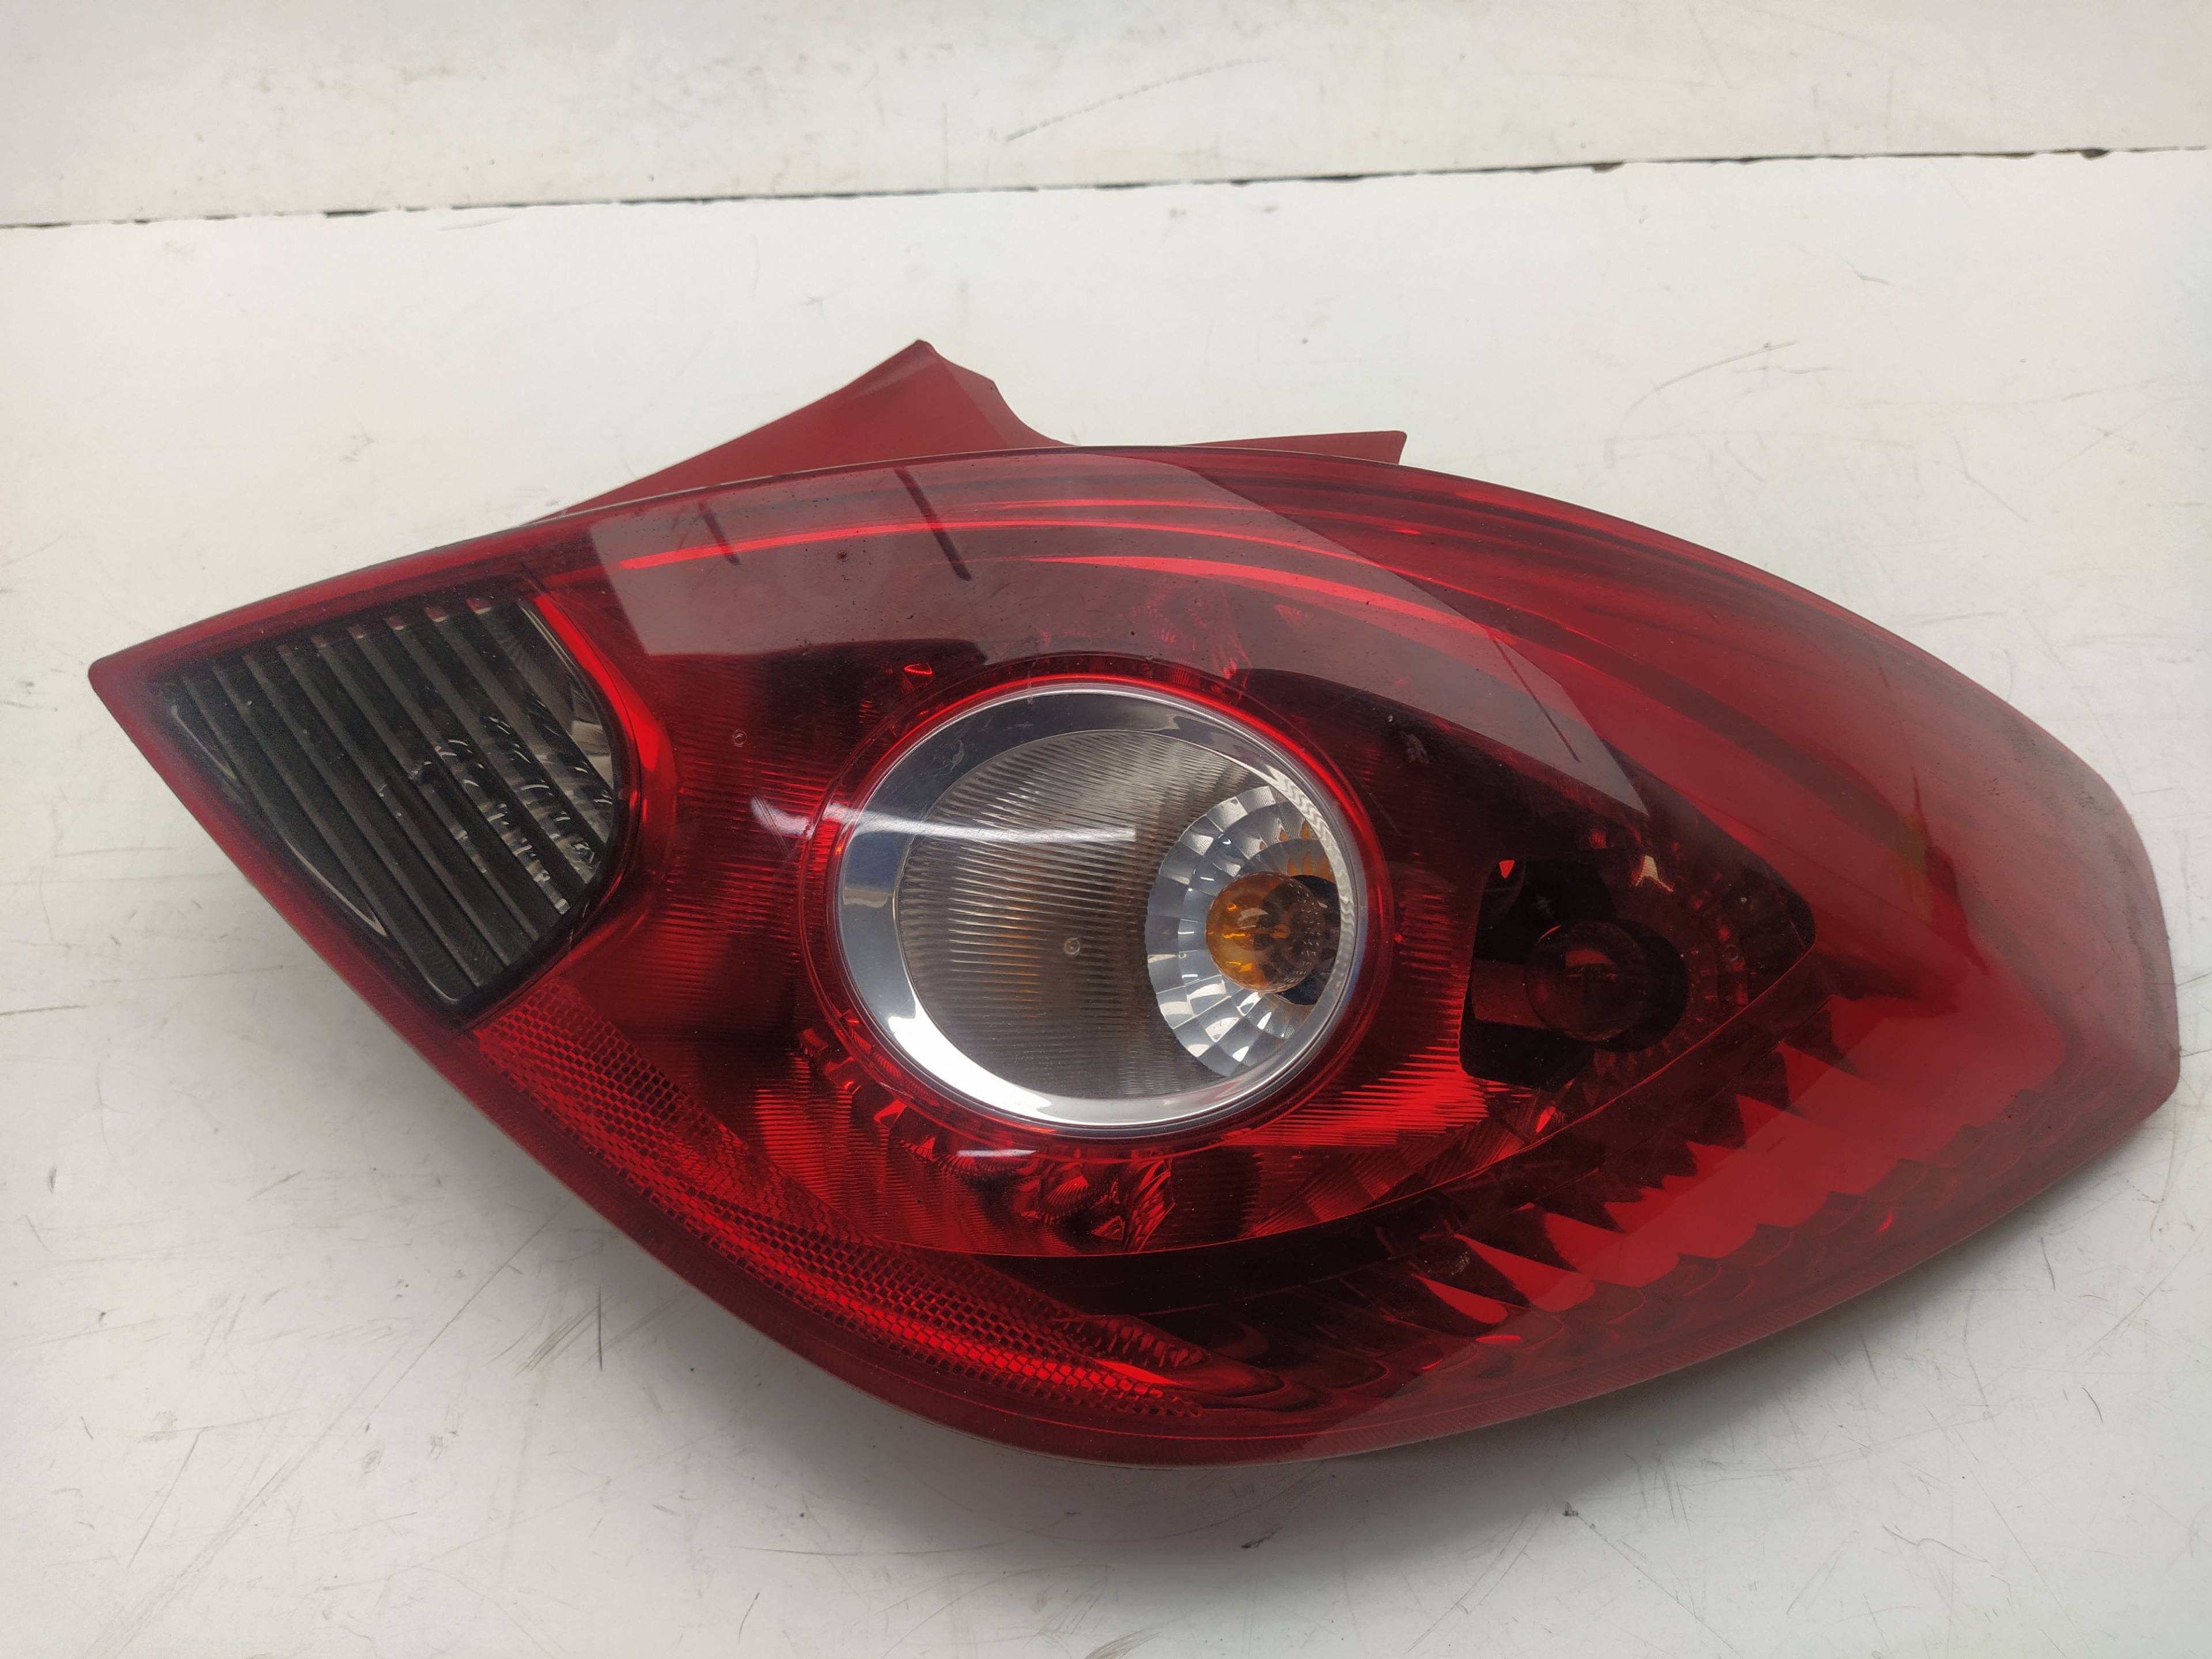 OPEL Corsa D (2006-2020) Rear Right Taillight Lamp 13186351, 89038961A 24012746